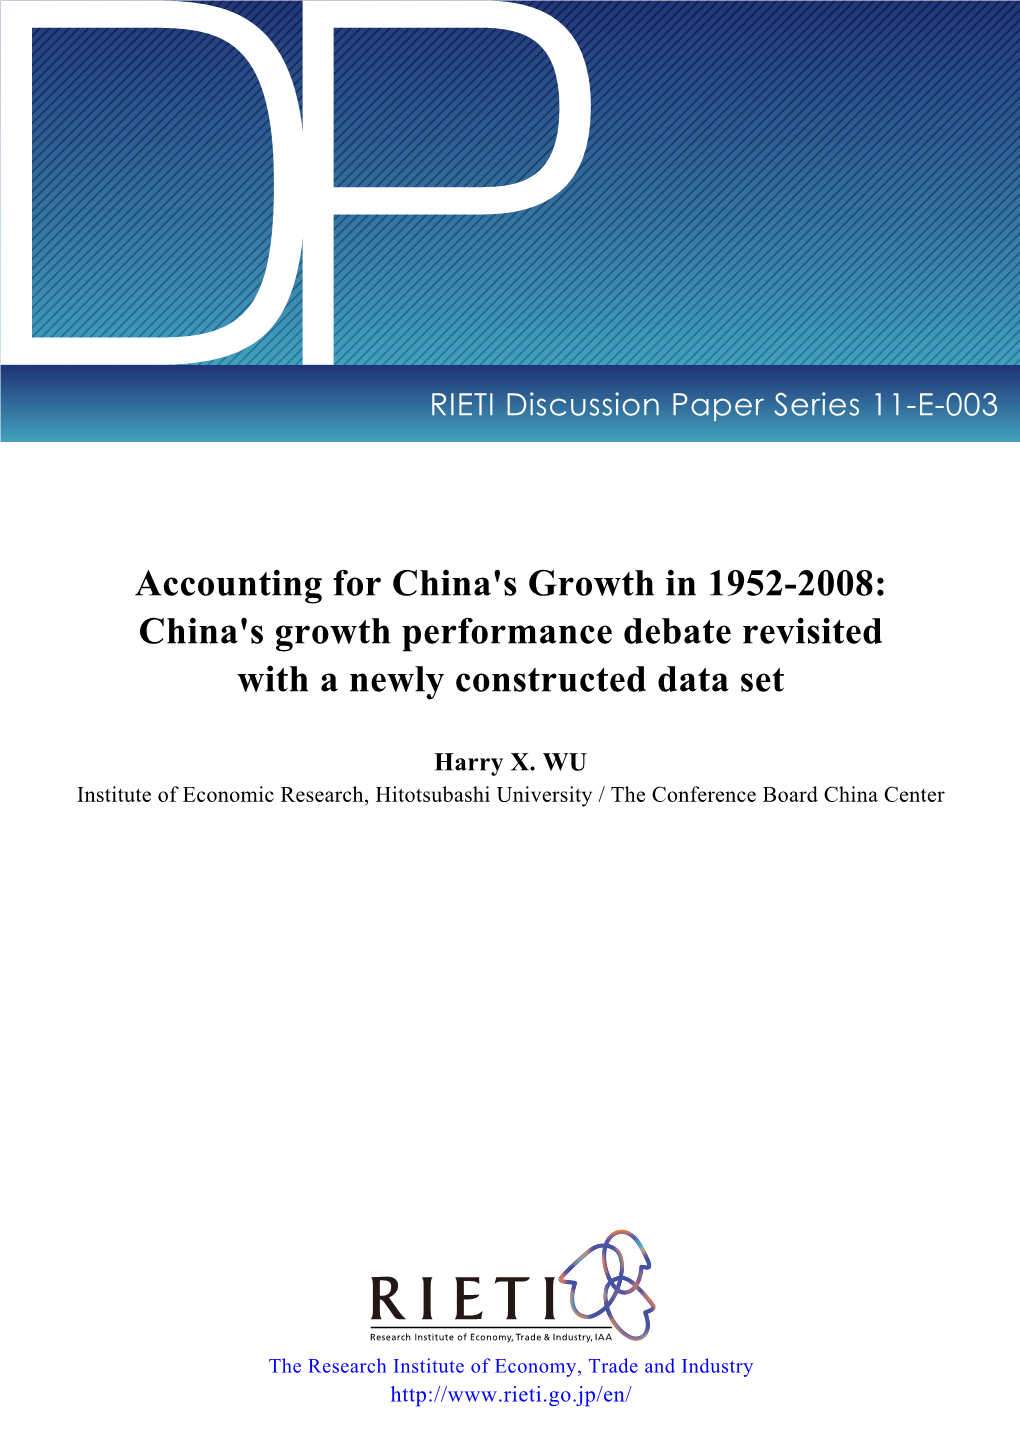 Accounting for China's Growth in 1952-2008: China's Growth Performance Debate Revisited with a Newly Constructed Data Set